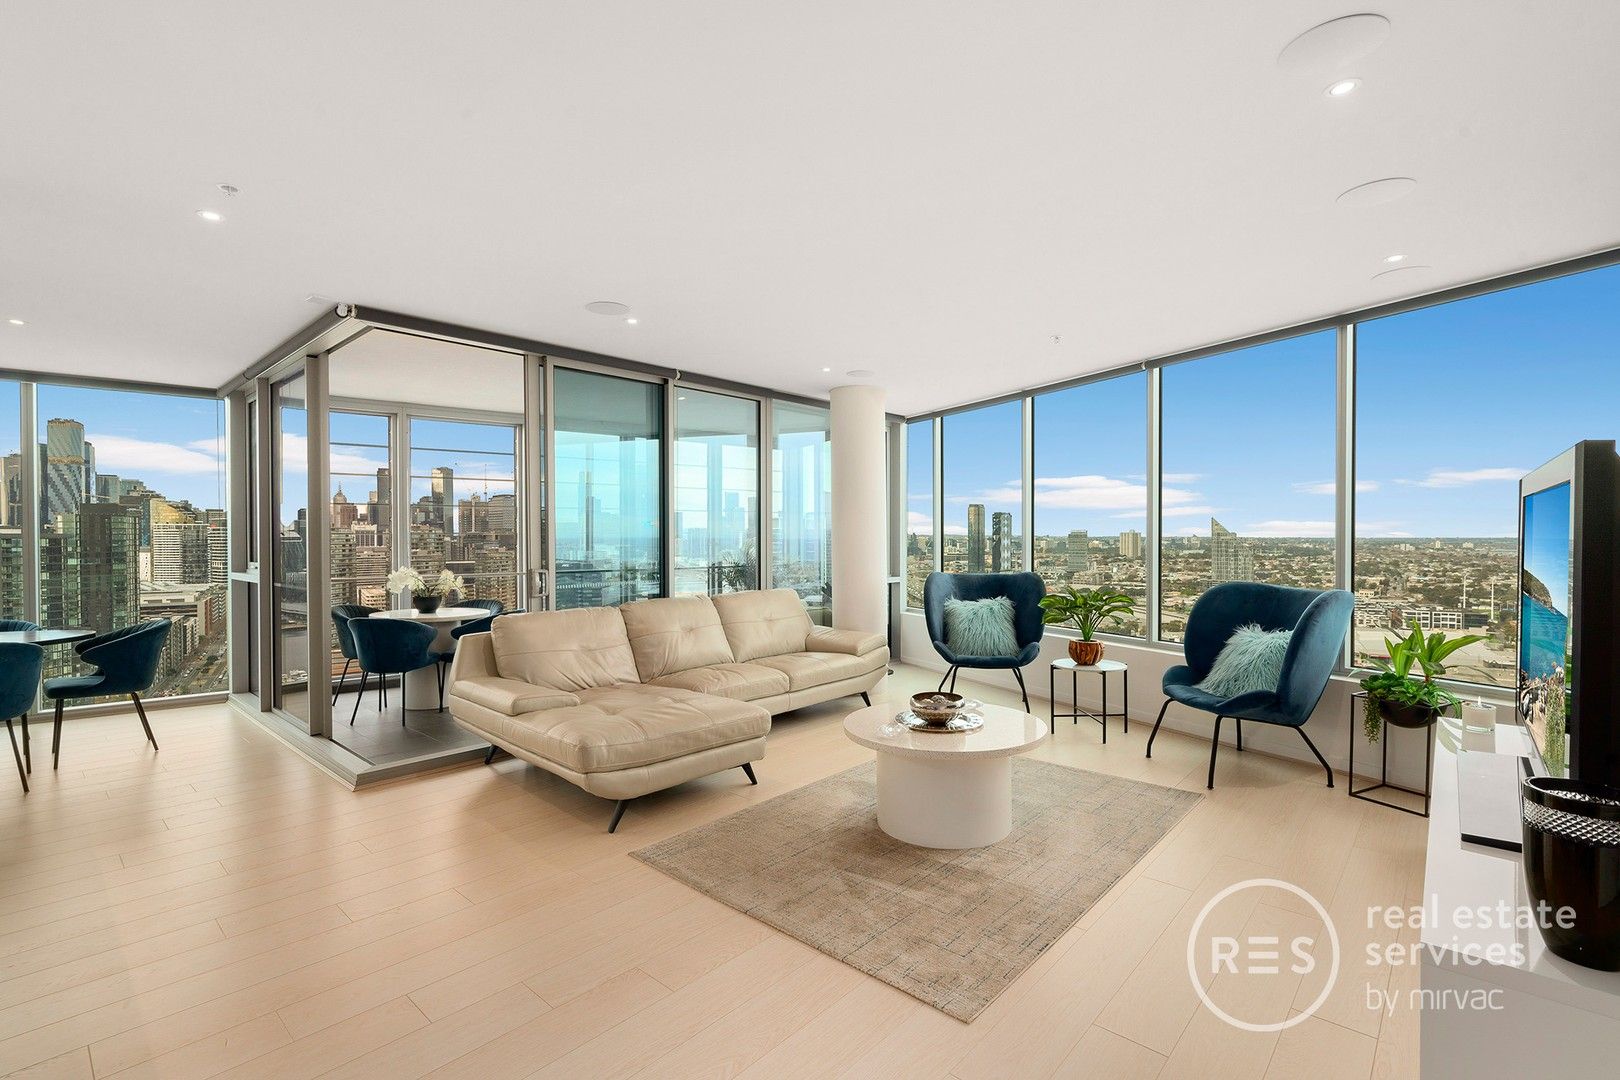 3 bedrooms Apartment / Unit / Flat in 2905/81 South Wharf Drive DOCKLANDS VIC, 3008